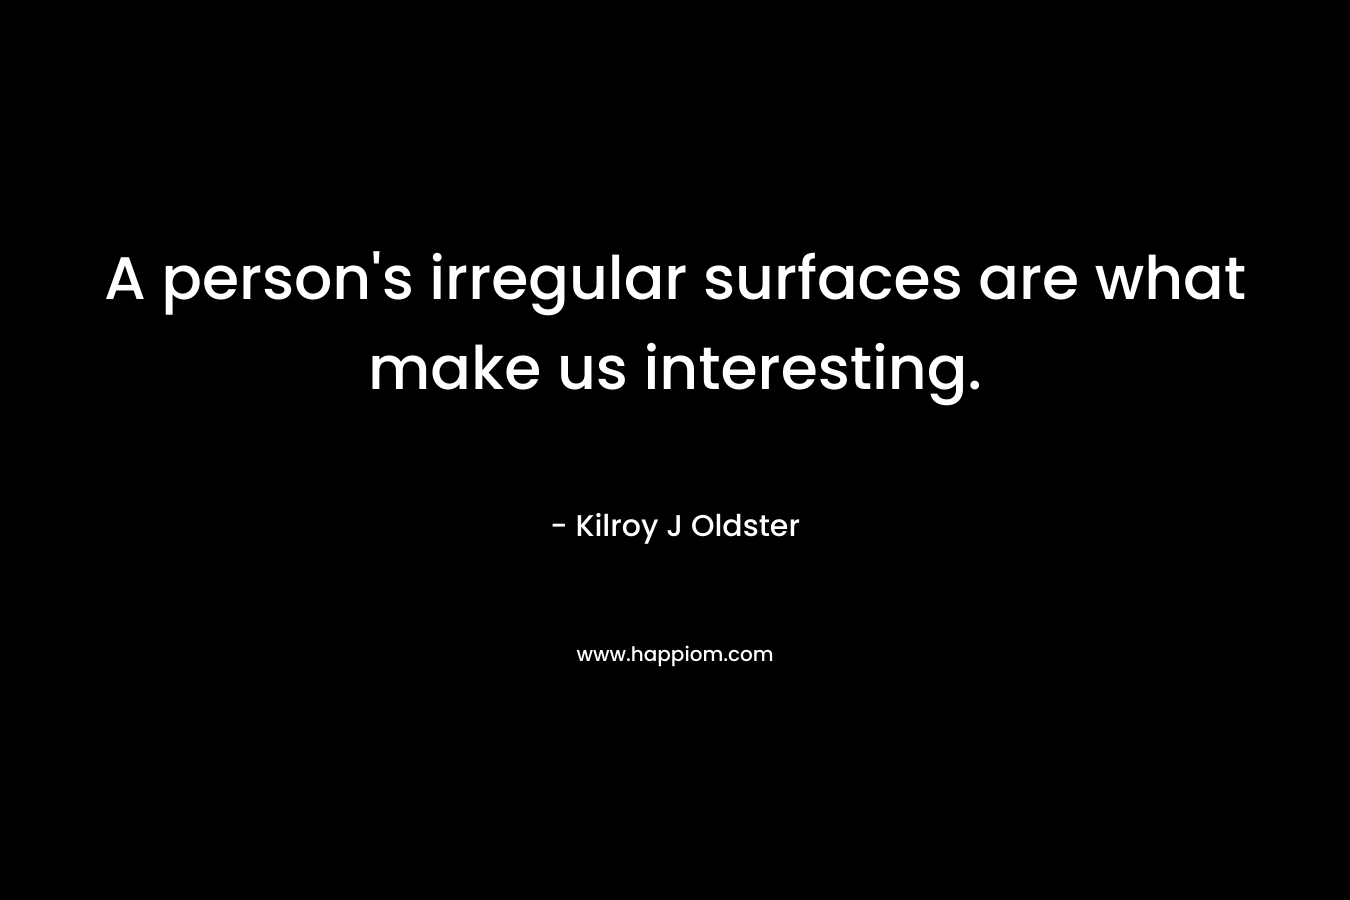 A person’s irregular surfaces are what make us interesting. – Kilroy J Oldster